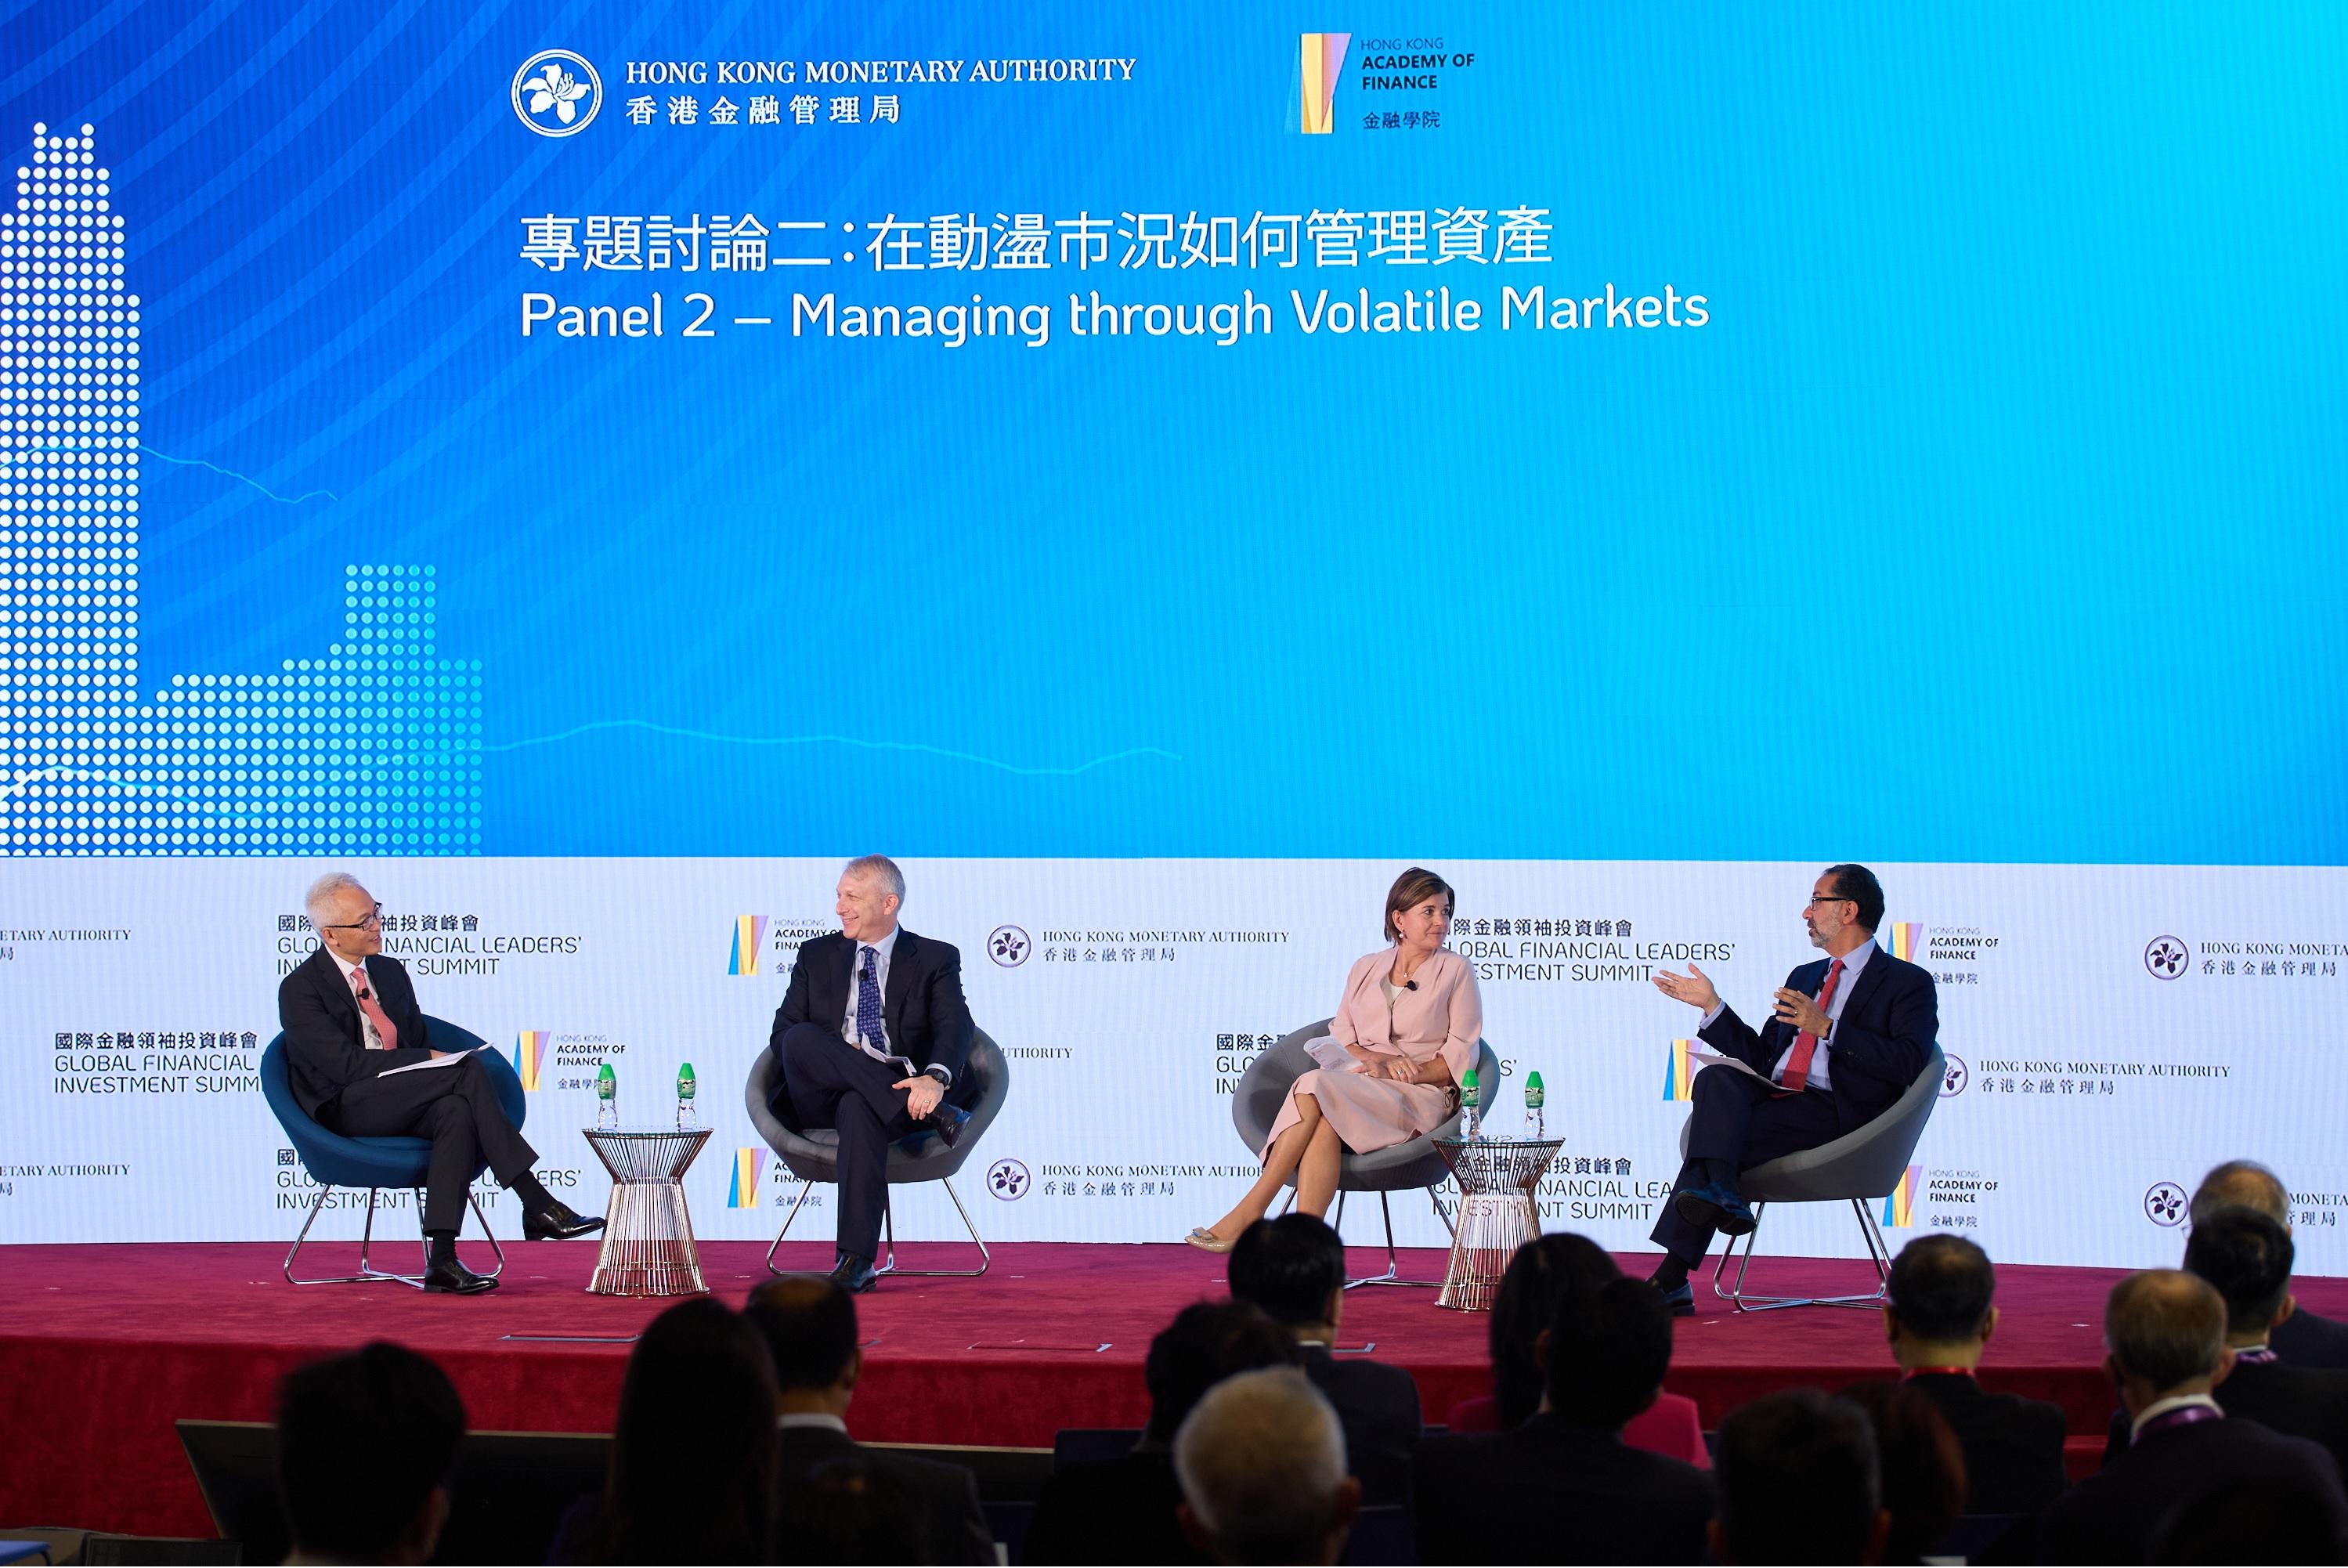 Deputy Chief Executive of the Hong Kong Monetary Authority Mr Howard Lee (first left) moderates a panel discussion on "Managing through Volatile Markets" at the "Conversations with Global Investors" seminar of the Global Financial Leaders' Investment Summit today (November 3), and is joined by (from second left) President and Managing Partner of Wellington Management Mr Stephen Klar; Chief Executive Officer of BNY Mellon Investment Management Ms Hanneke Smits; and President and CEO of State Street Global Advisors Mr Cyrus Taraporevala.